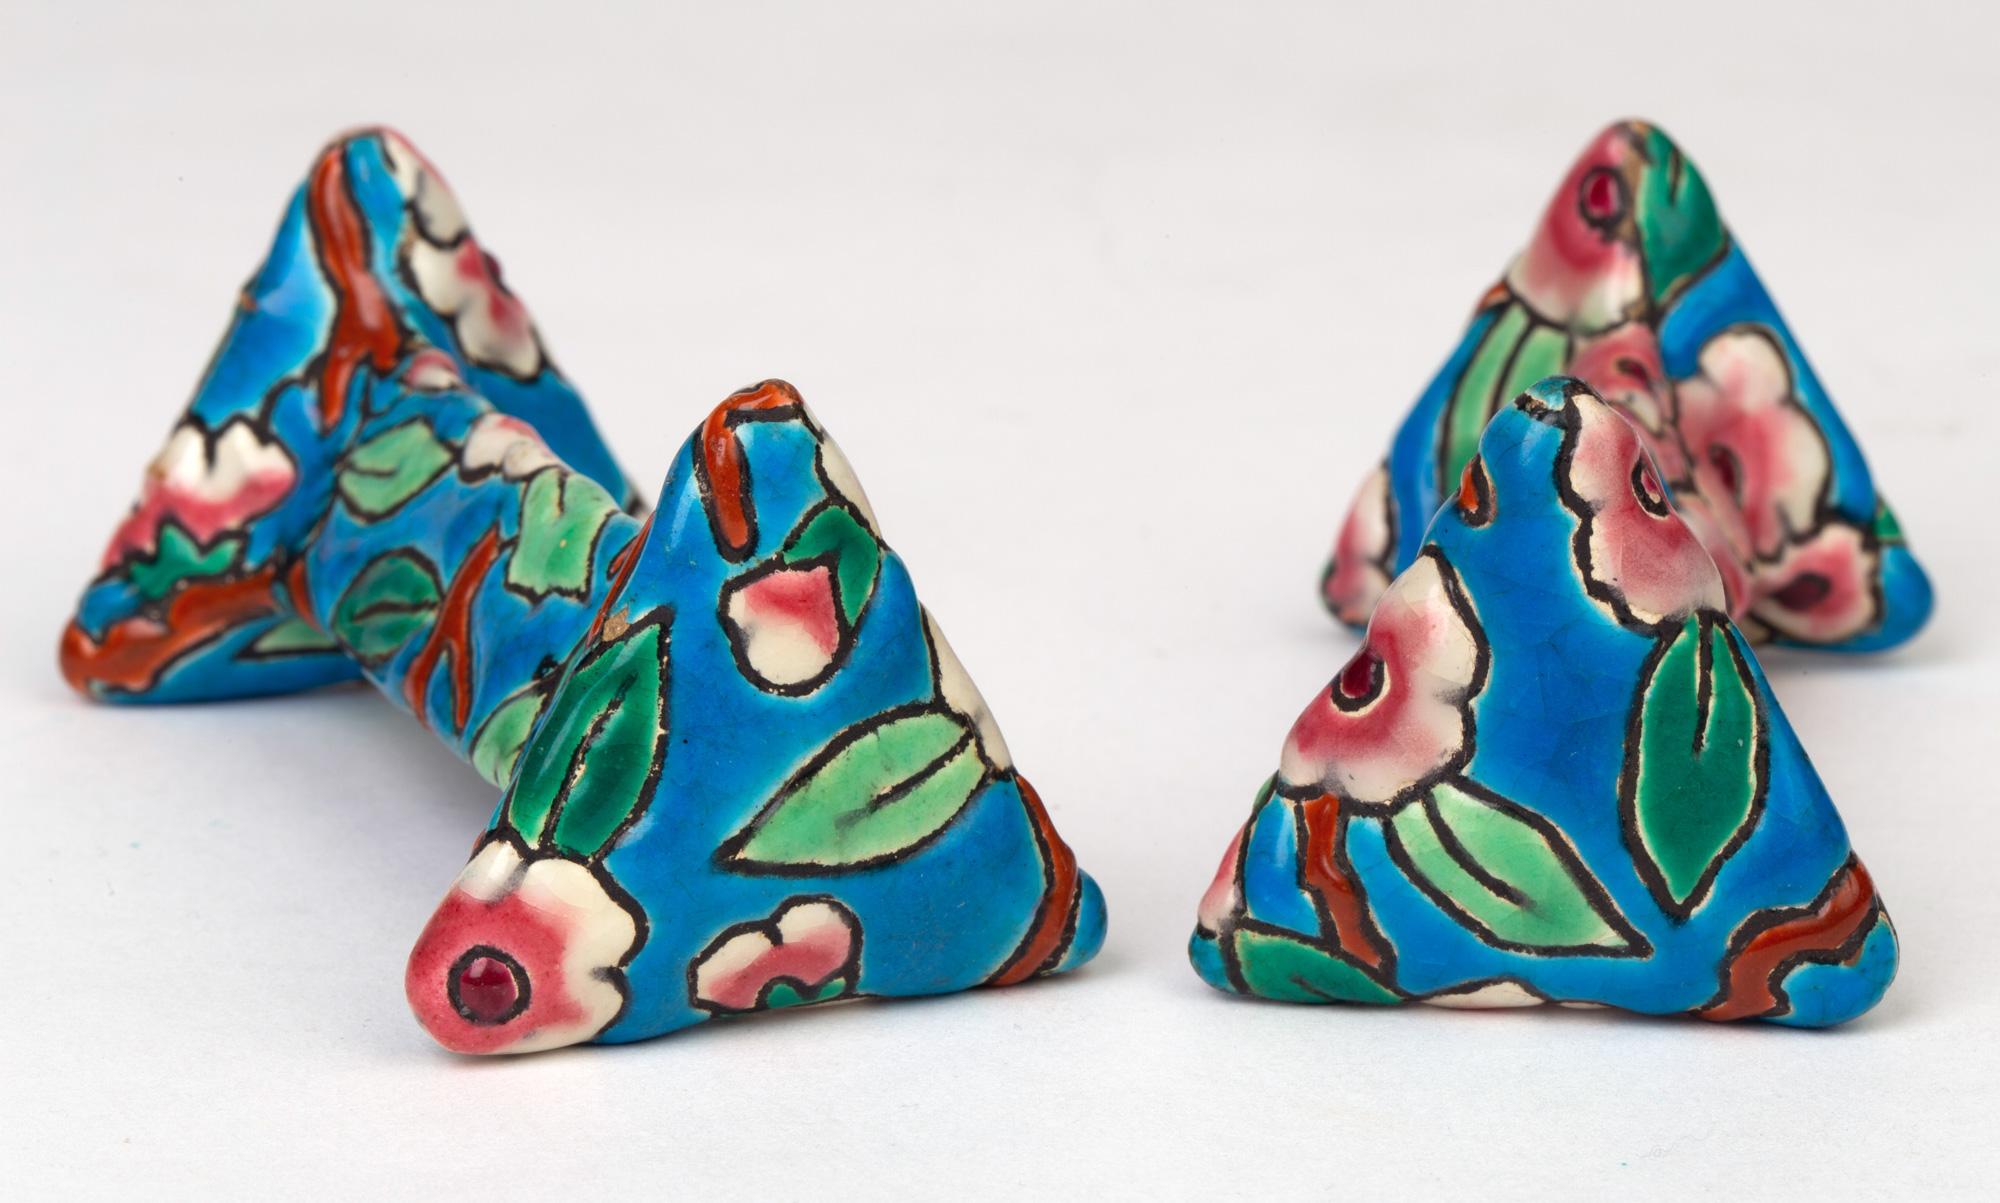 A fine quality pair French Art Deco Emaux de Longwy pottery knife rests decorated in bright enamels with floral designs and dating between 1920 and 1930. The knife rests are formed in triangular shape with a triangular rest set between two larger